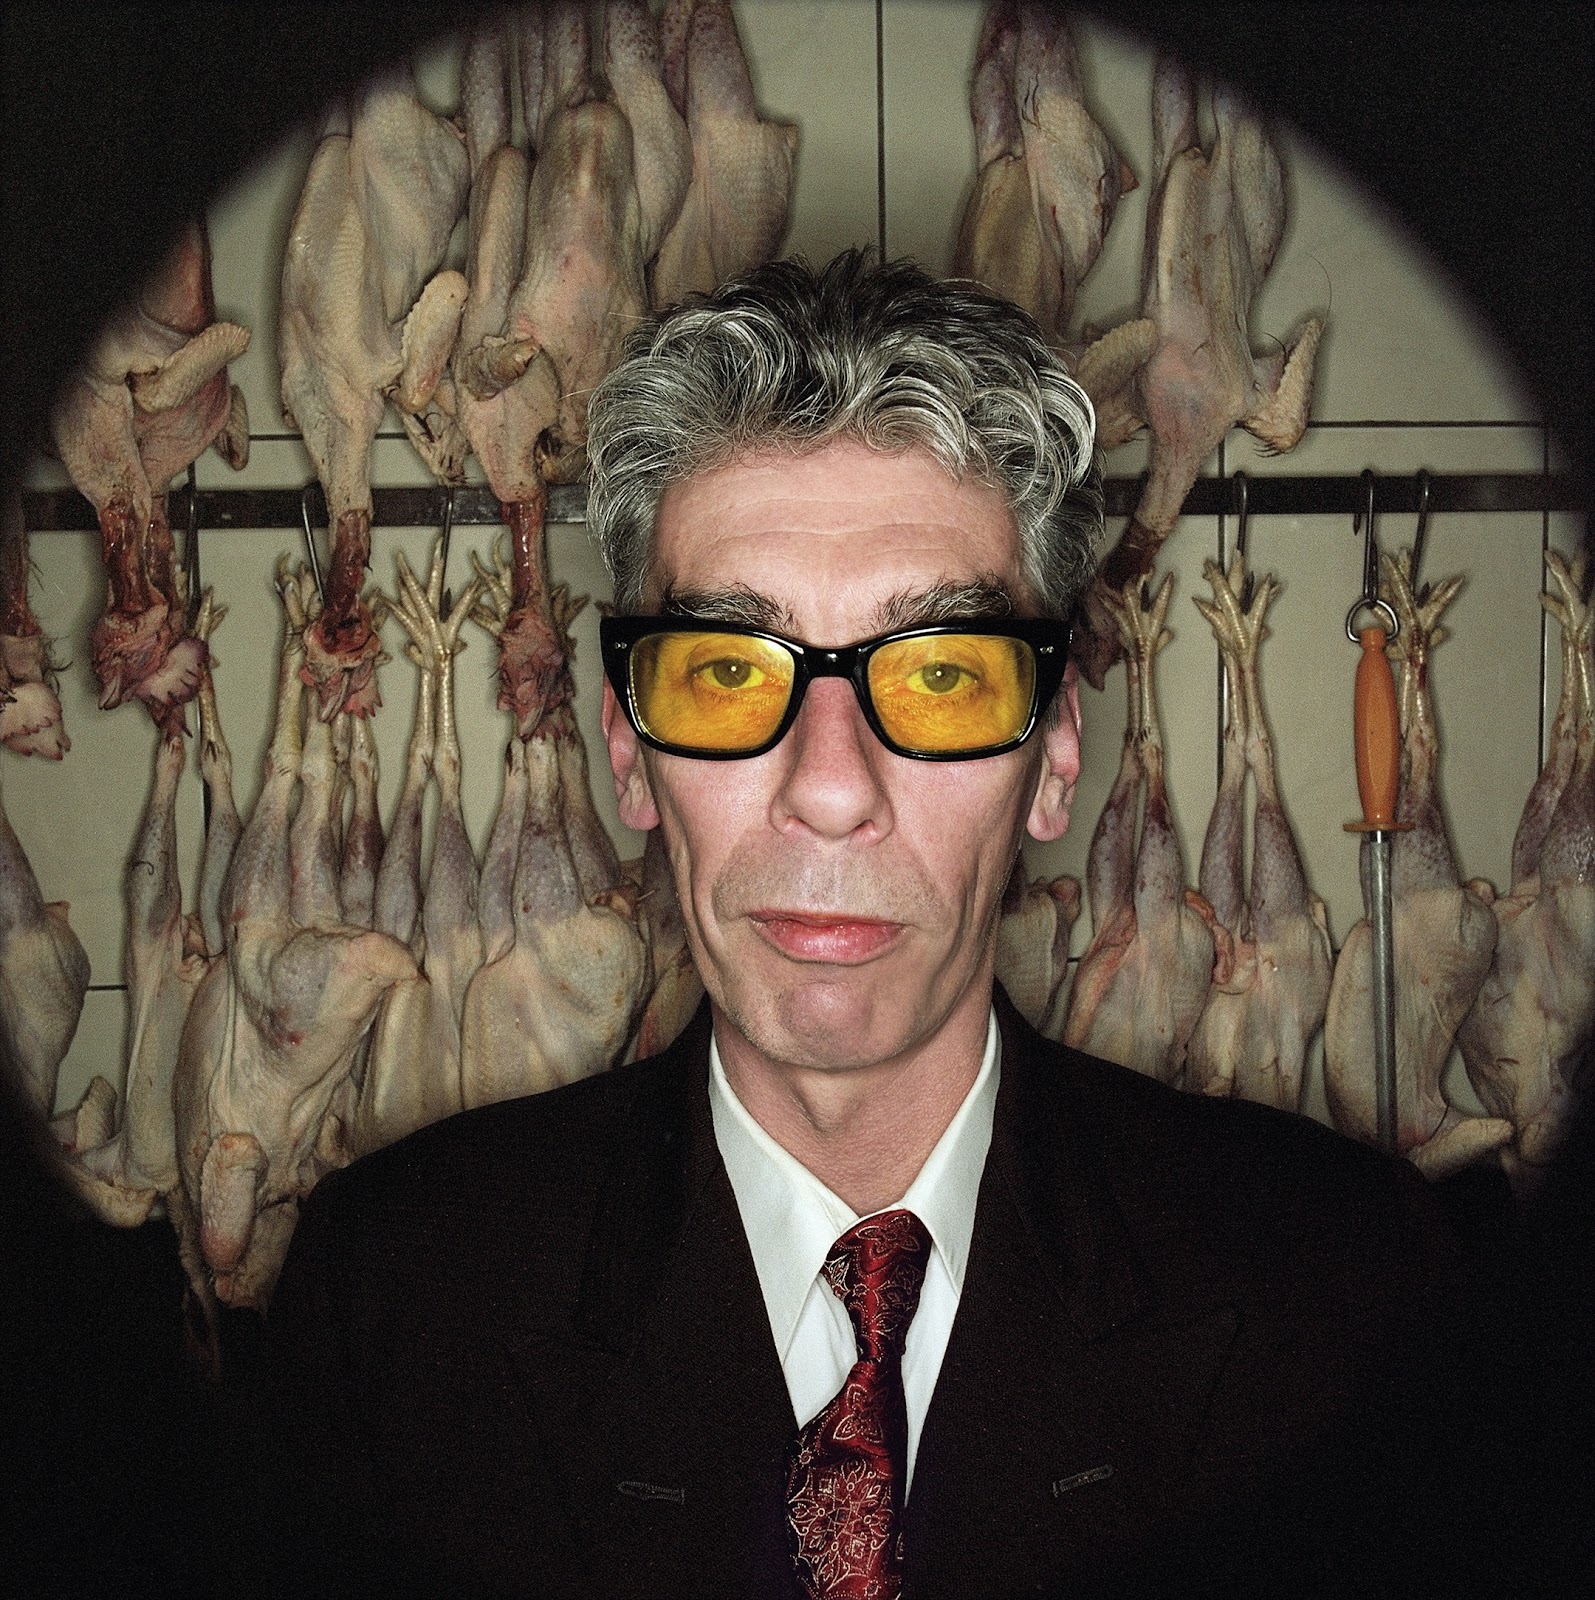 A quirky image by photographer Matt Carr with the personality of the subject shining through. The subject, an older gentleman with salt and pepper hair and a serious expression, wears a fairly formal black suit and red tie. However, his formal image is offset by the bright yellow tinted lenses in his glasses and the chicken carcasses hanging in the background.